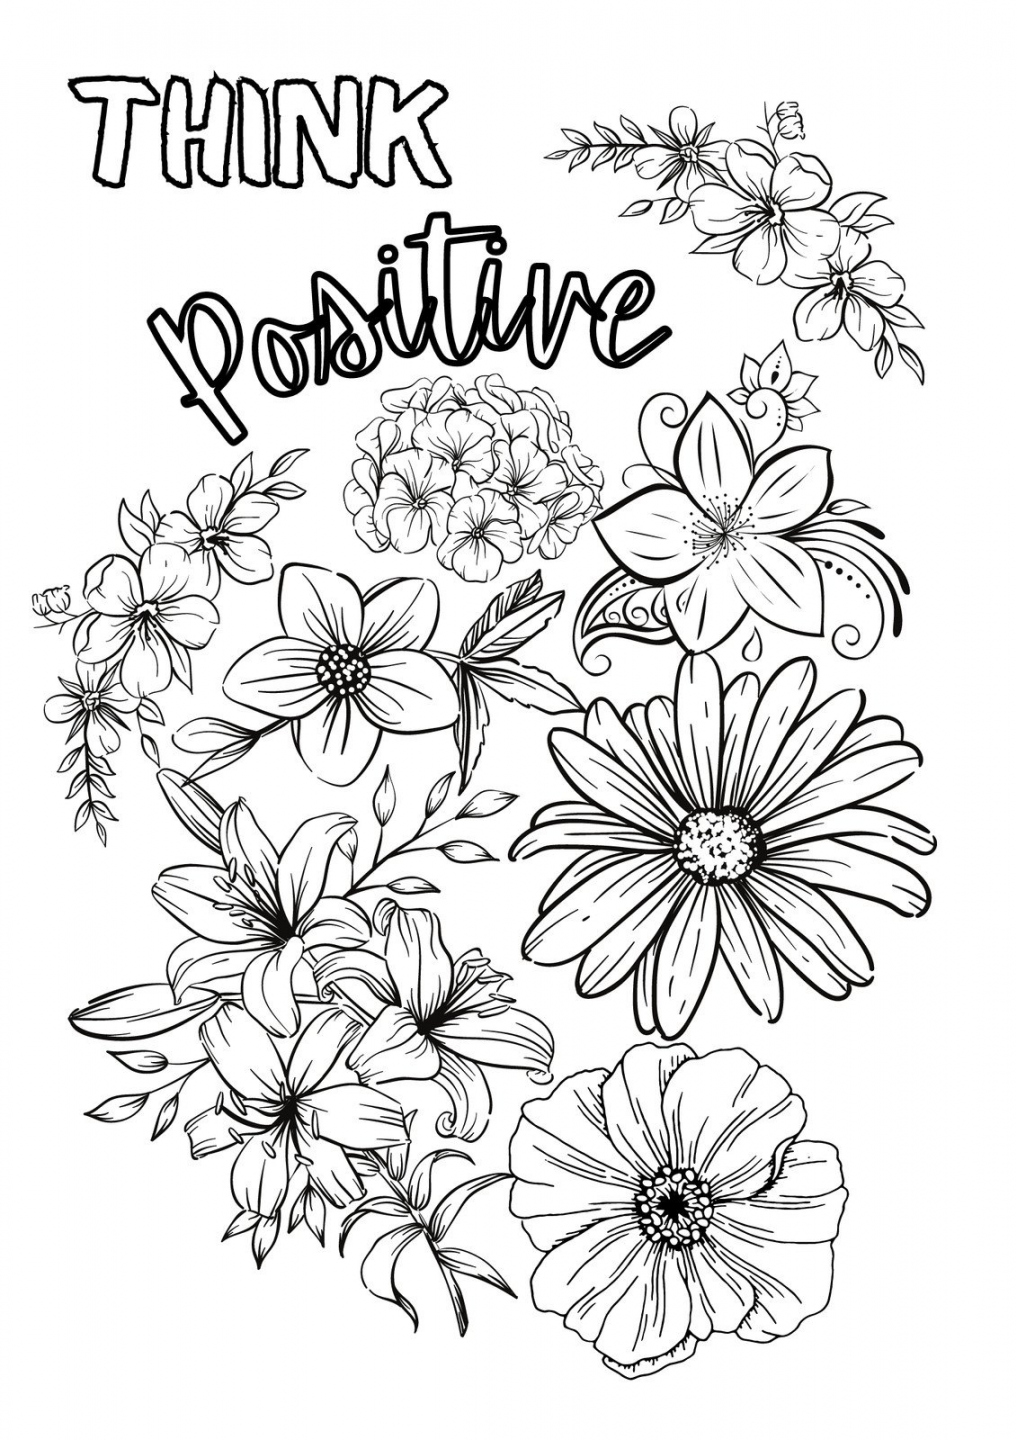 Free printable coloring page templates to customize  Canva - FREE Printables - Printable Canvas Painting Templates Free